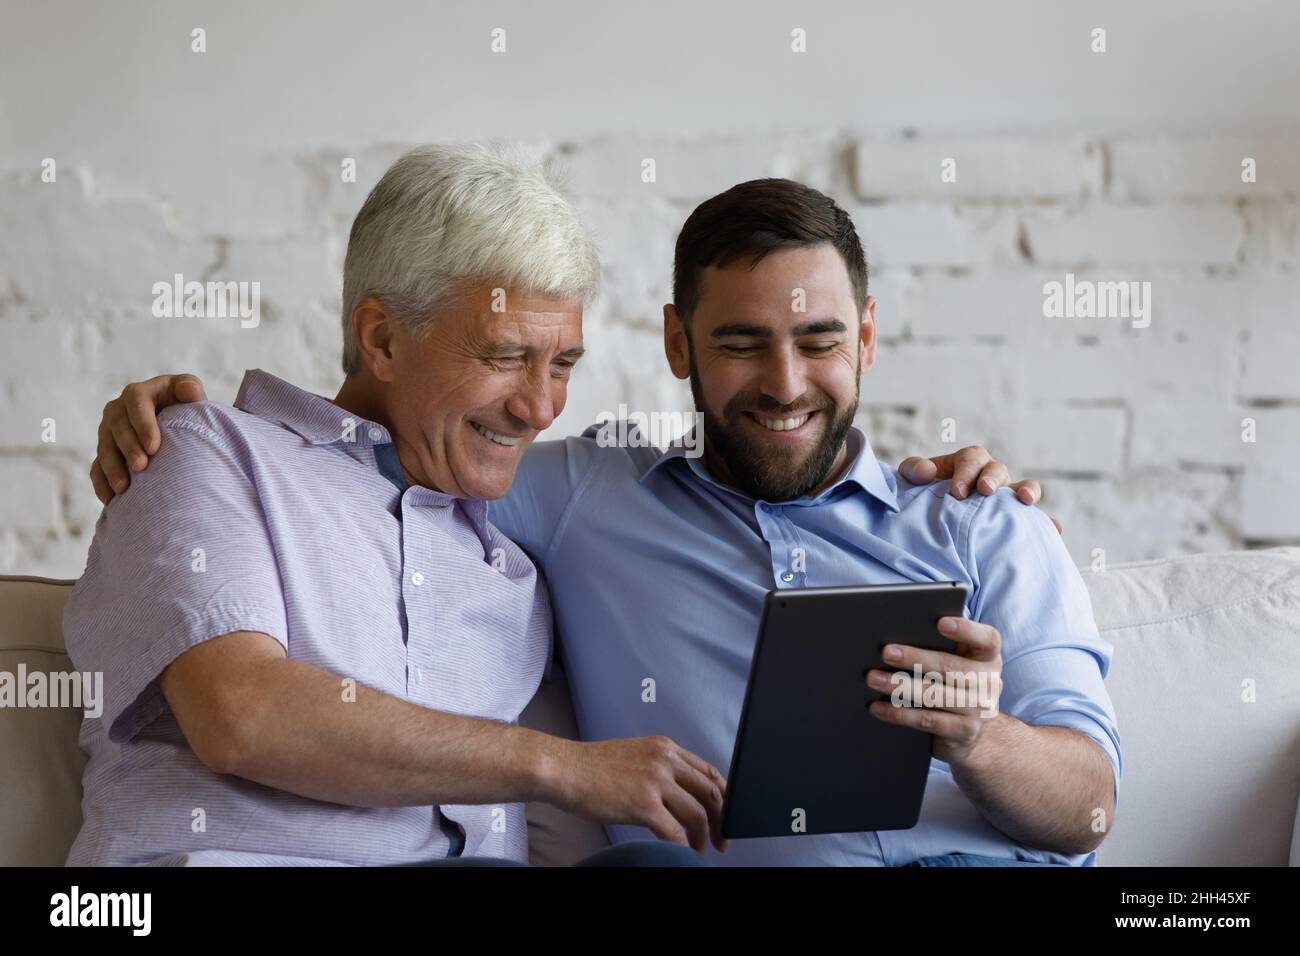 Happy adult son teaching mature father to use online app Stock Photo